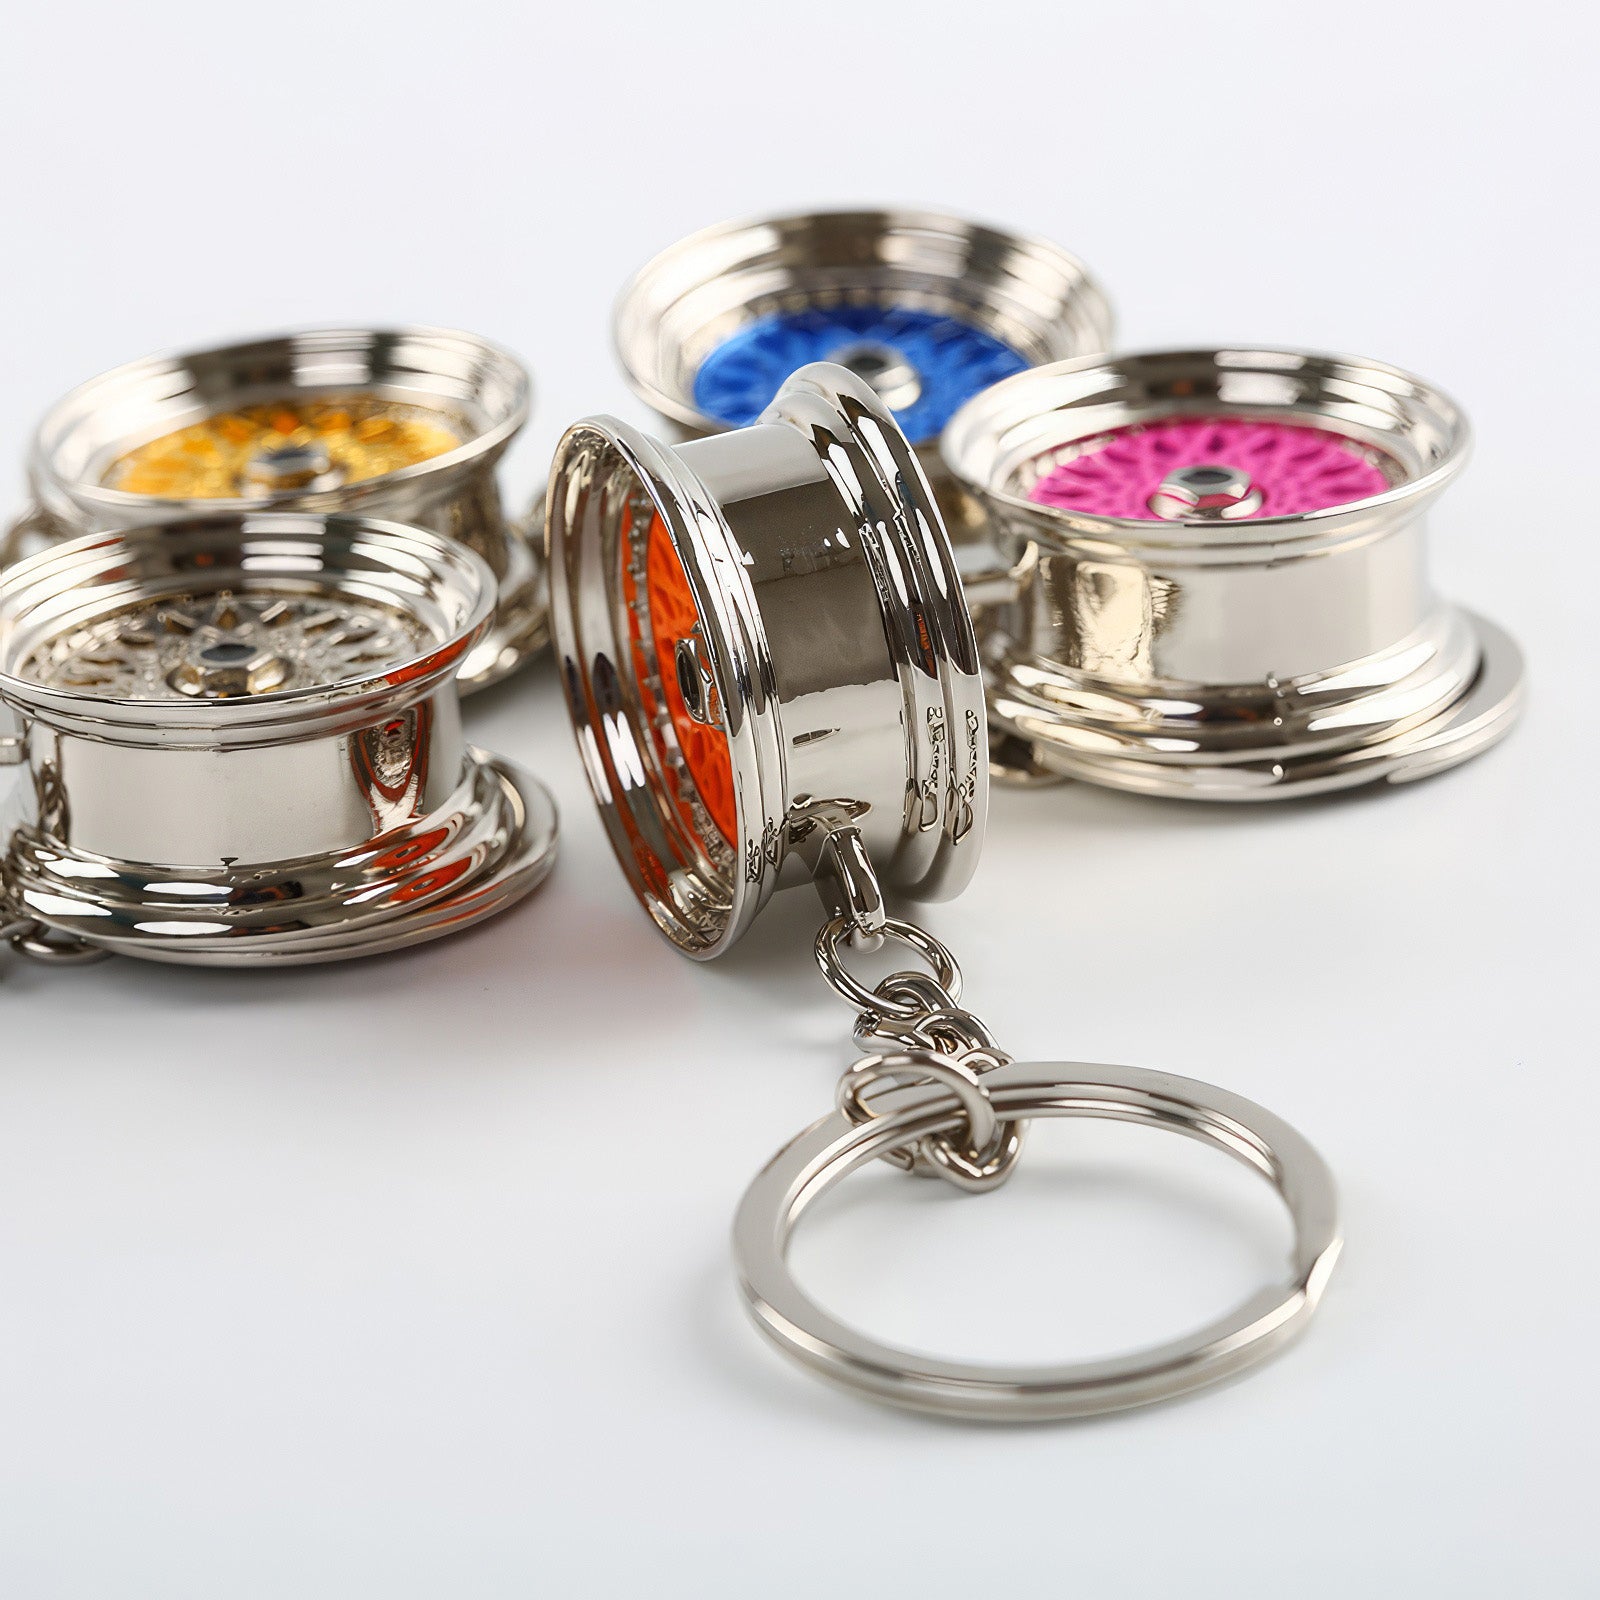 BBS Mesh Wheel keychains with pink, orange, blue, and gold center.